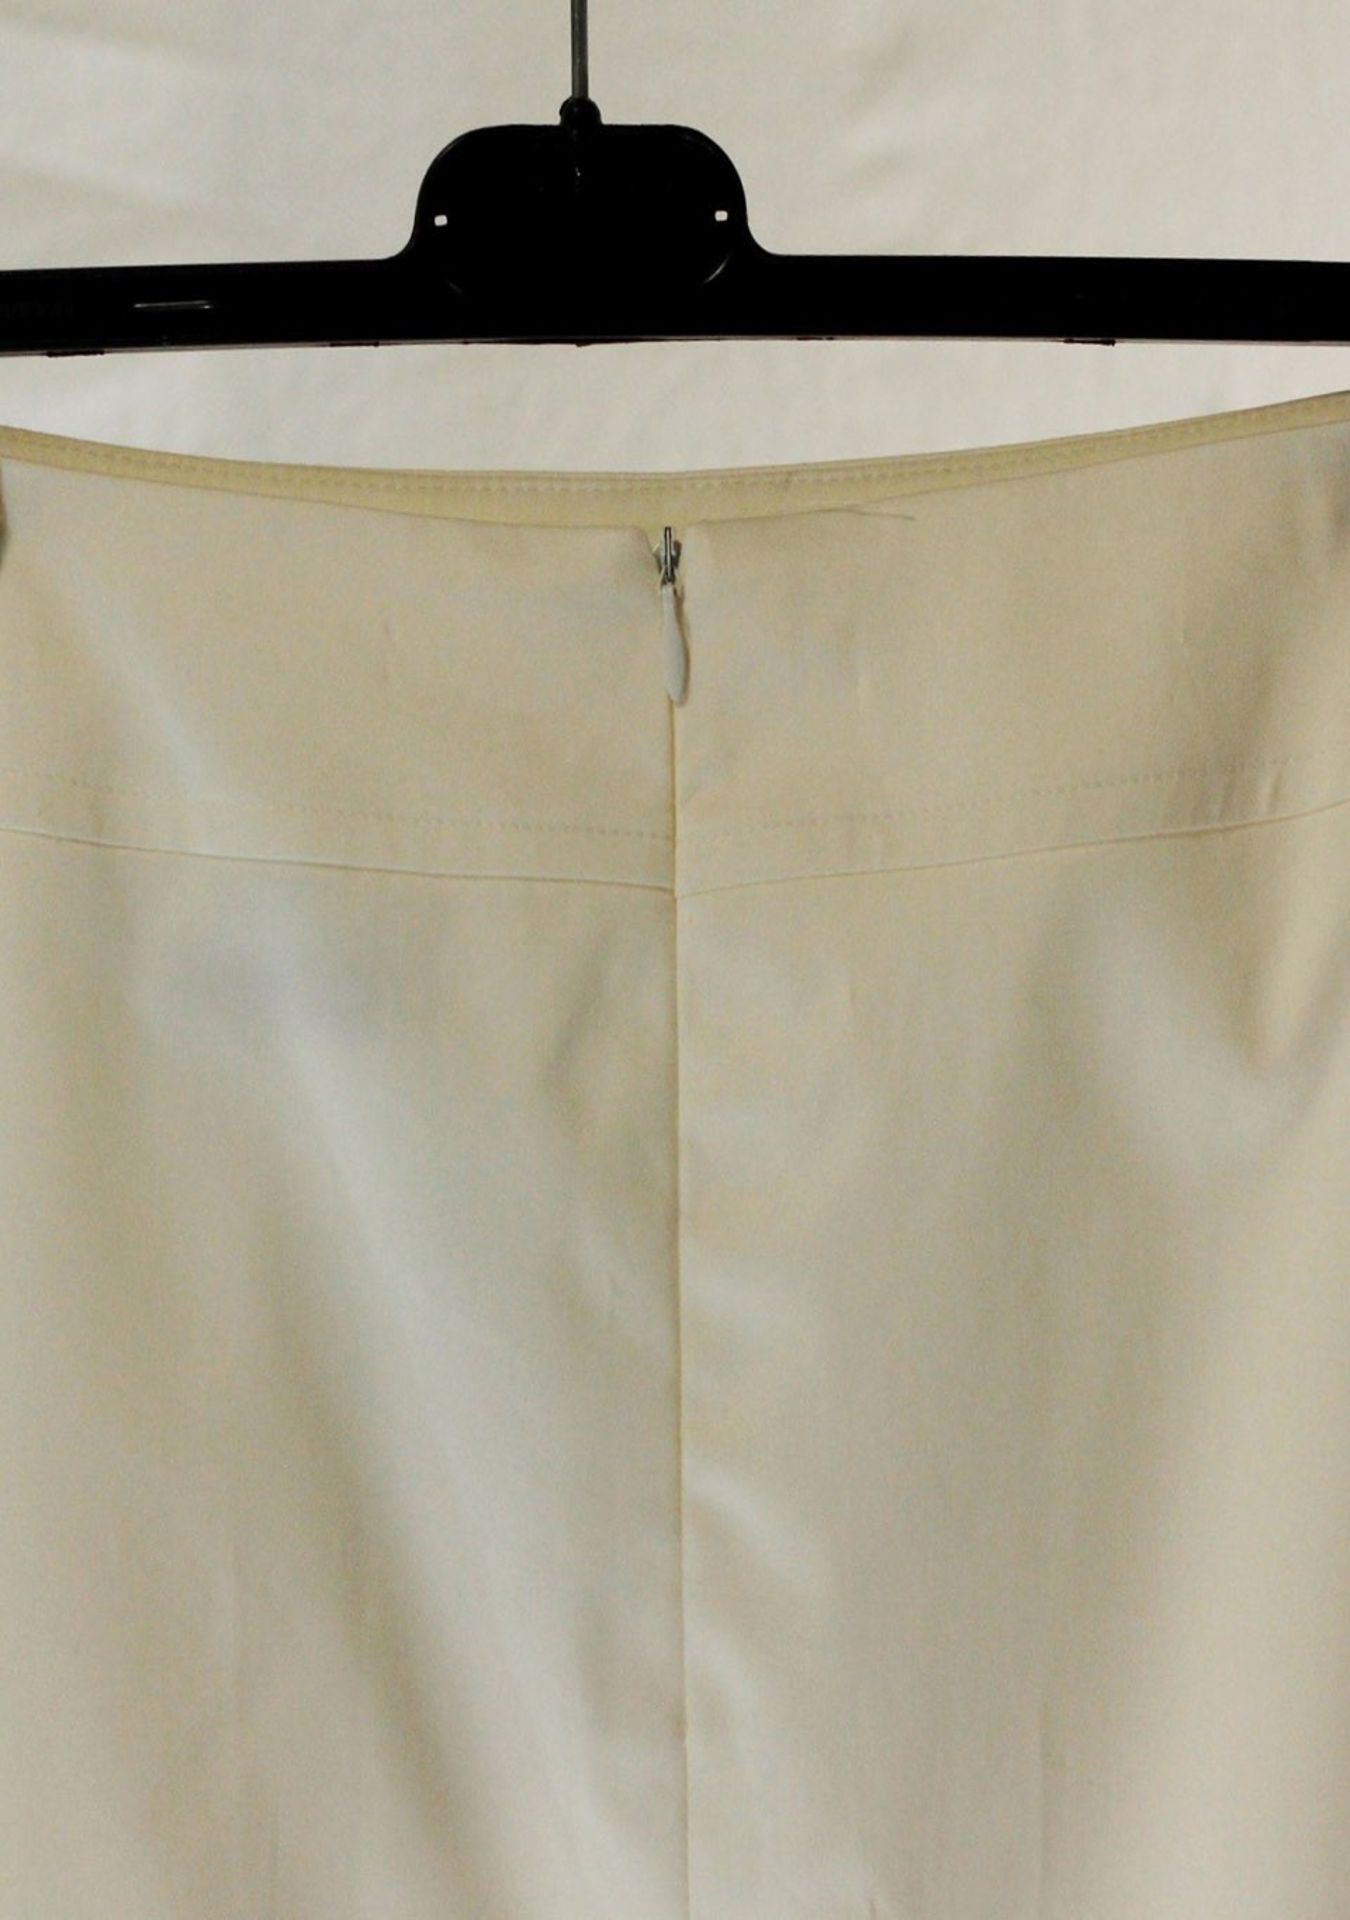 1 x Anne Belin White Skirt - Size: 14 - Material: 100% Cotton - From a High End Clothing Boutique In - Image 6 of 9